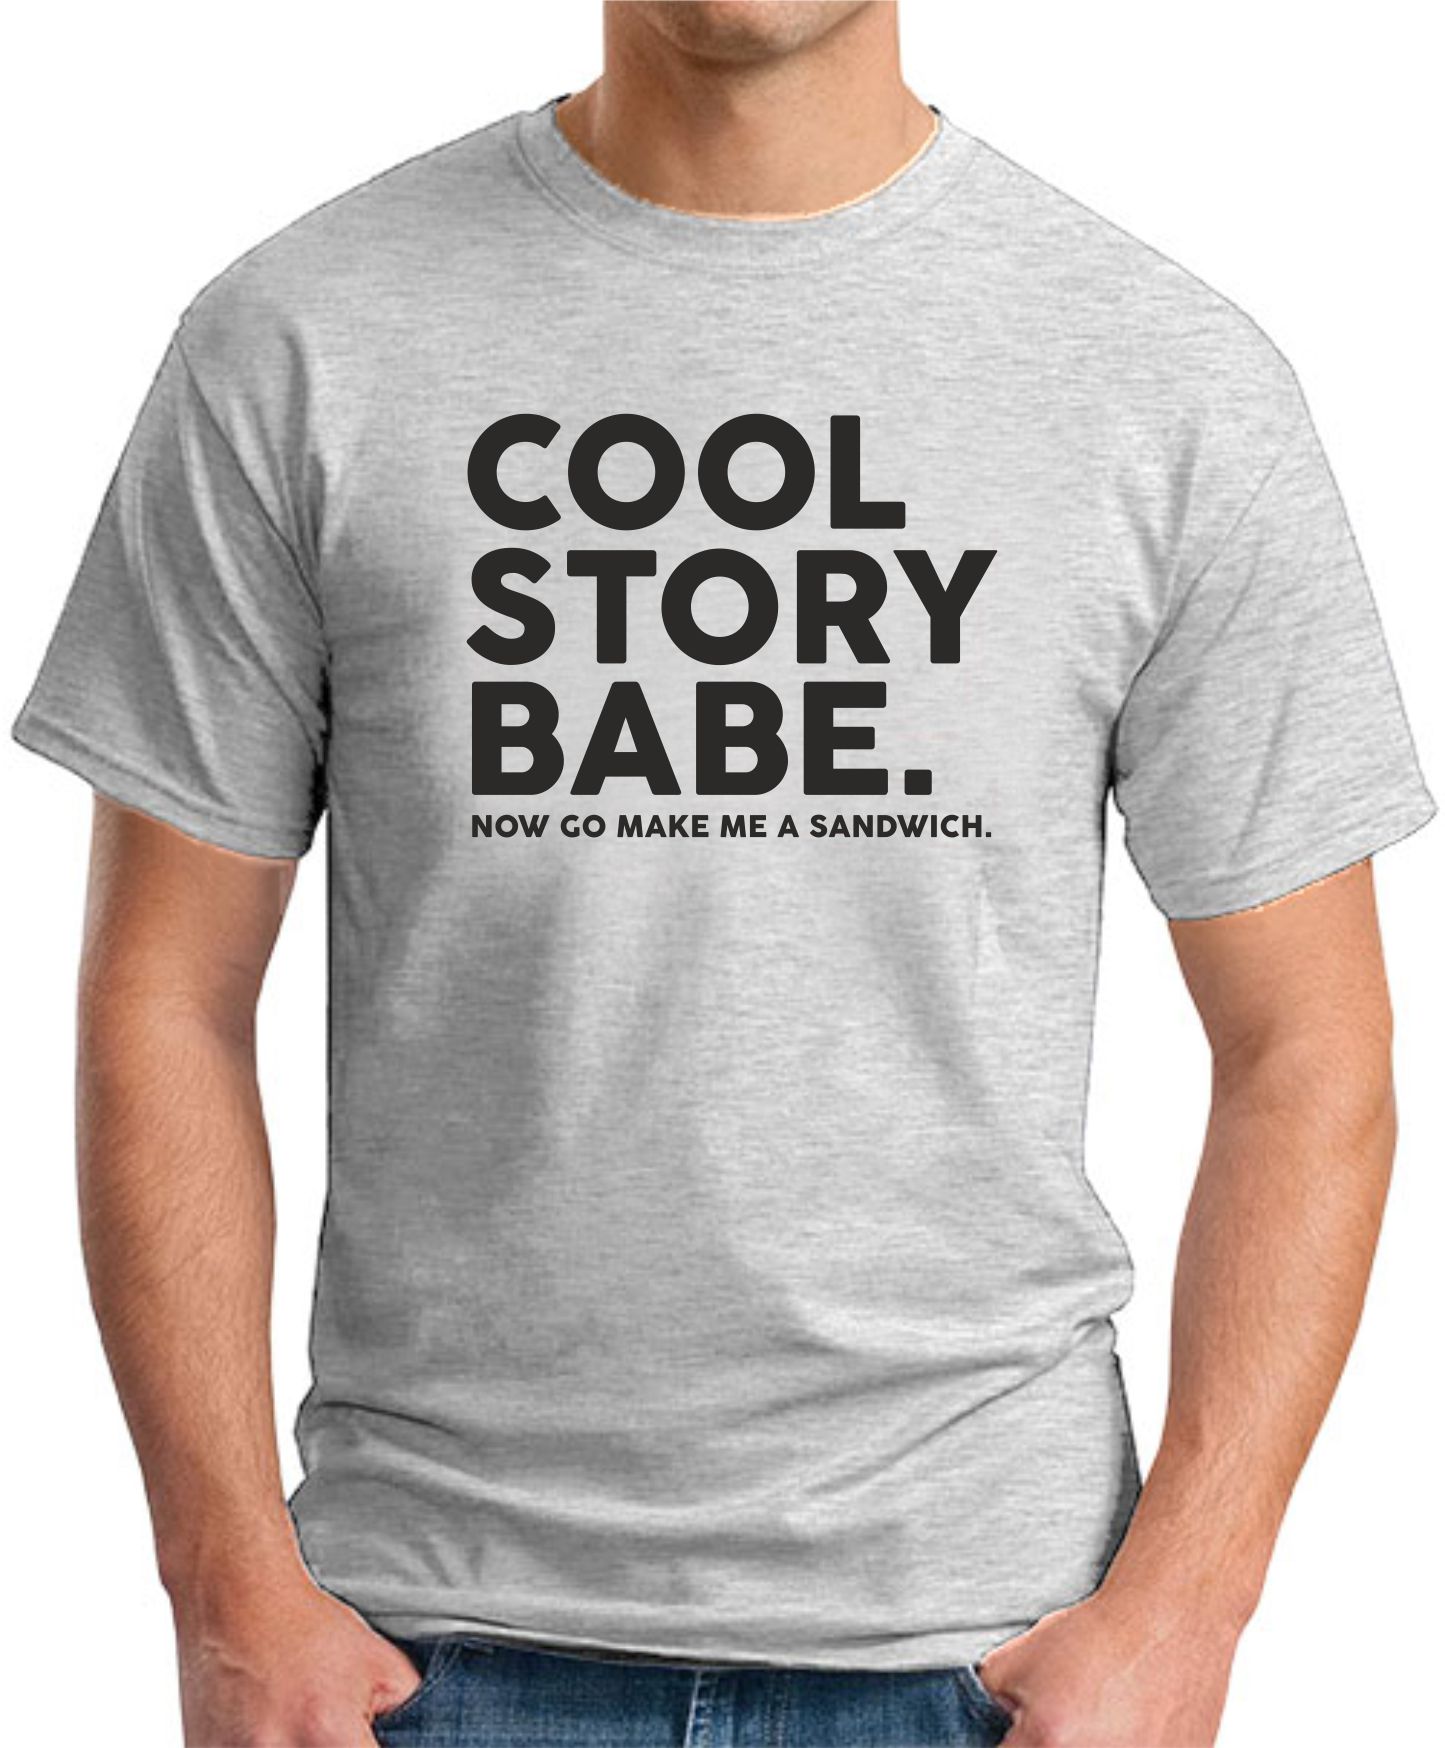 COOL STORY BABE NOW GO MAKE ME A SANDWICH T-SHIRT - GeekyTees